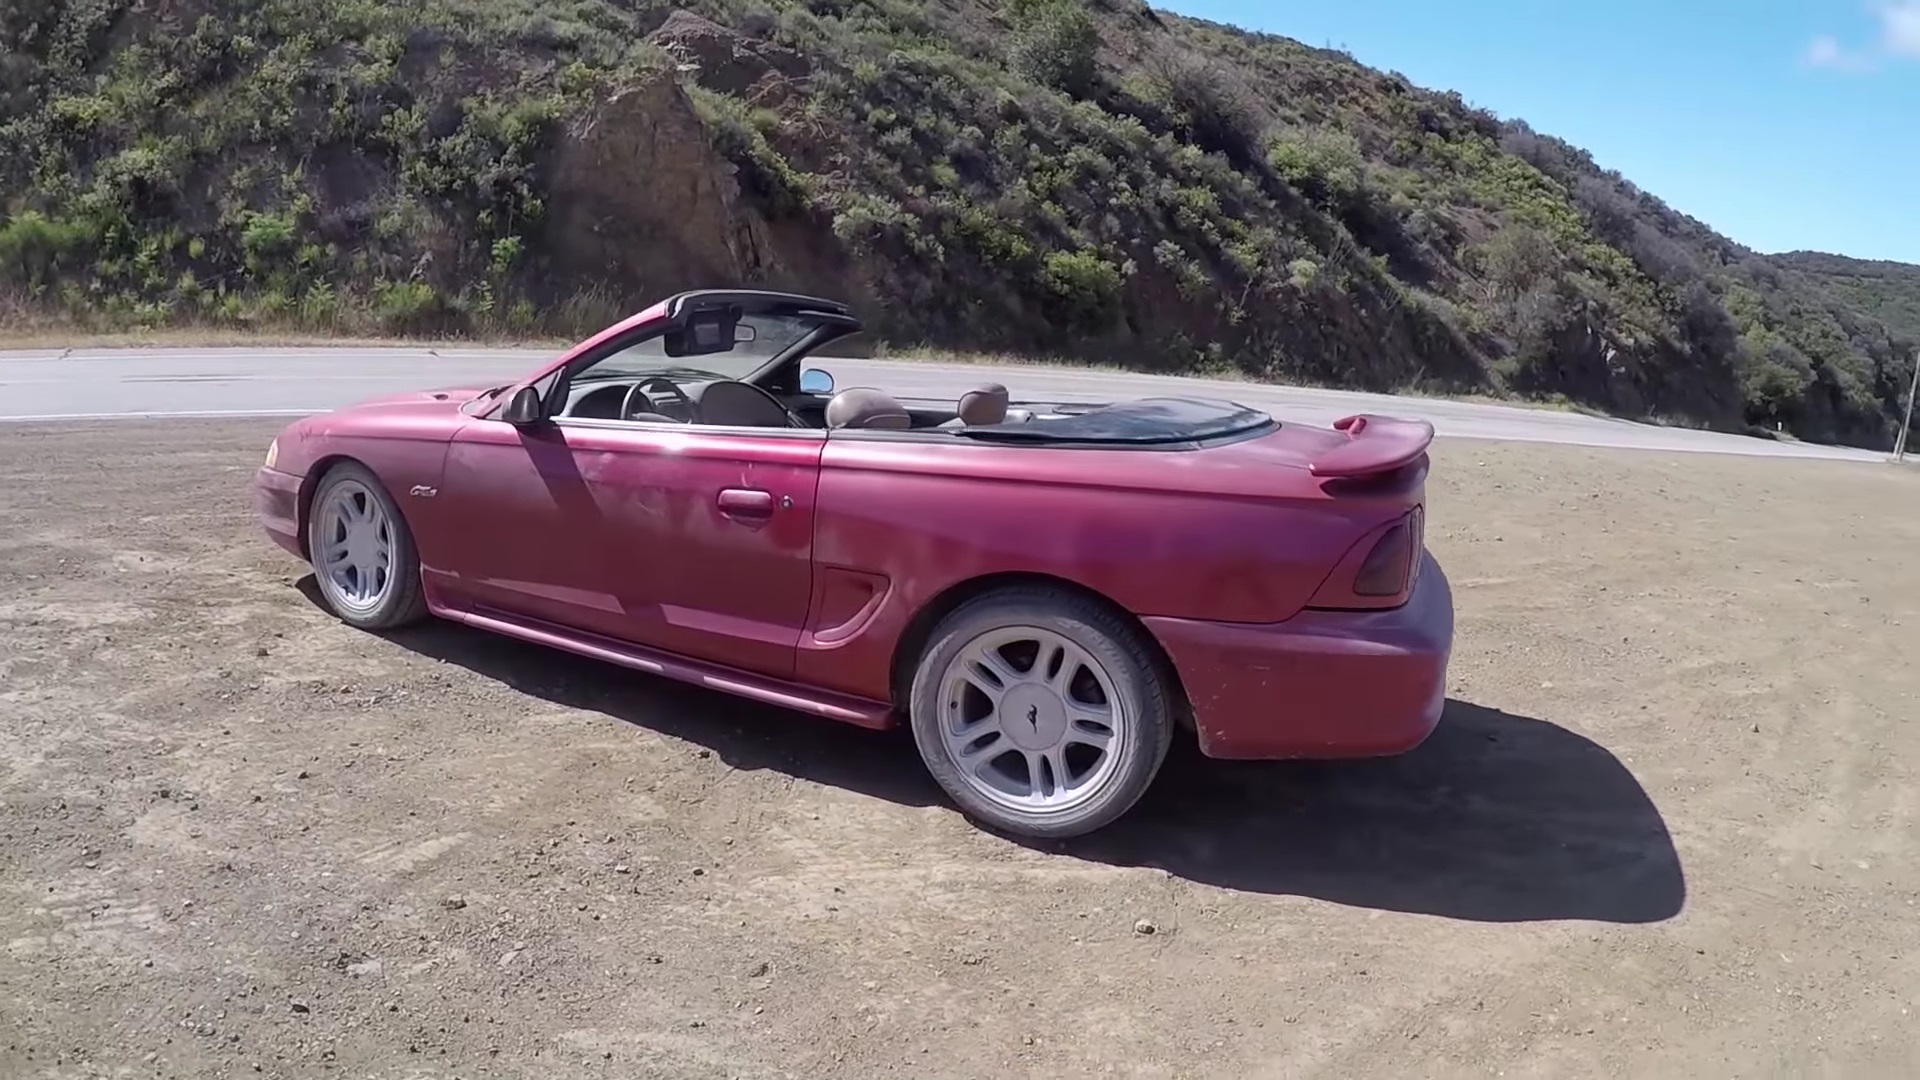 Video: 1996 Ford Mustang GT Convertible Review